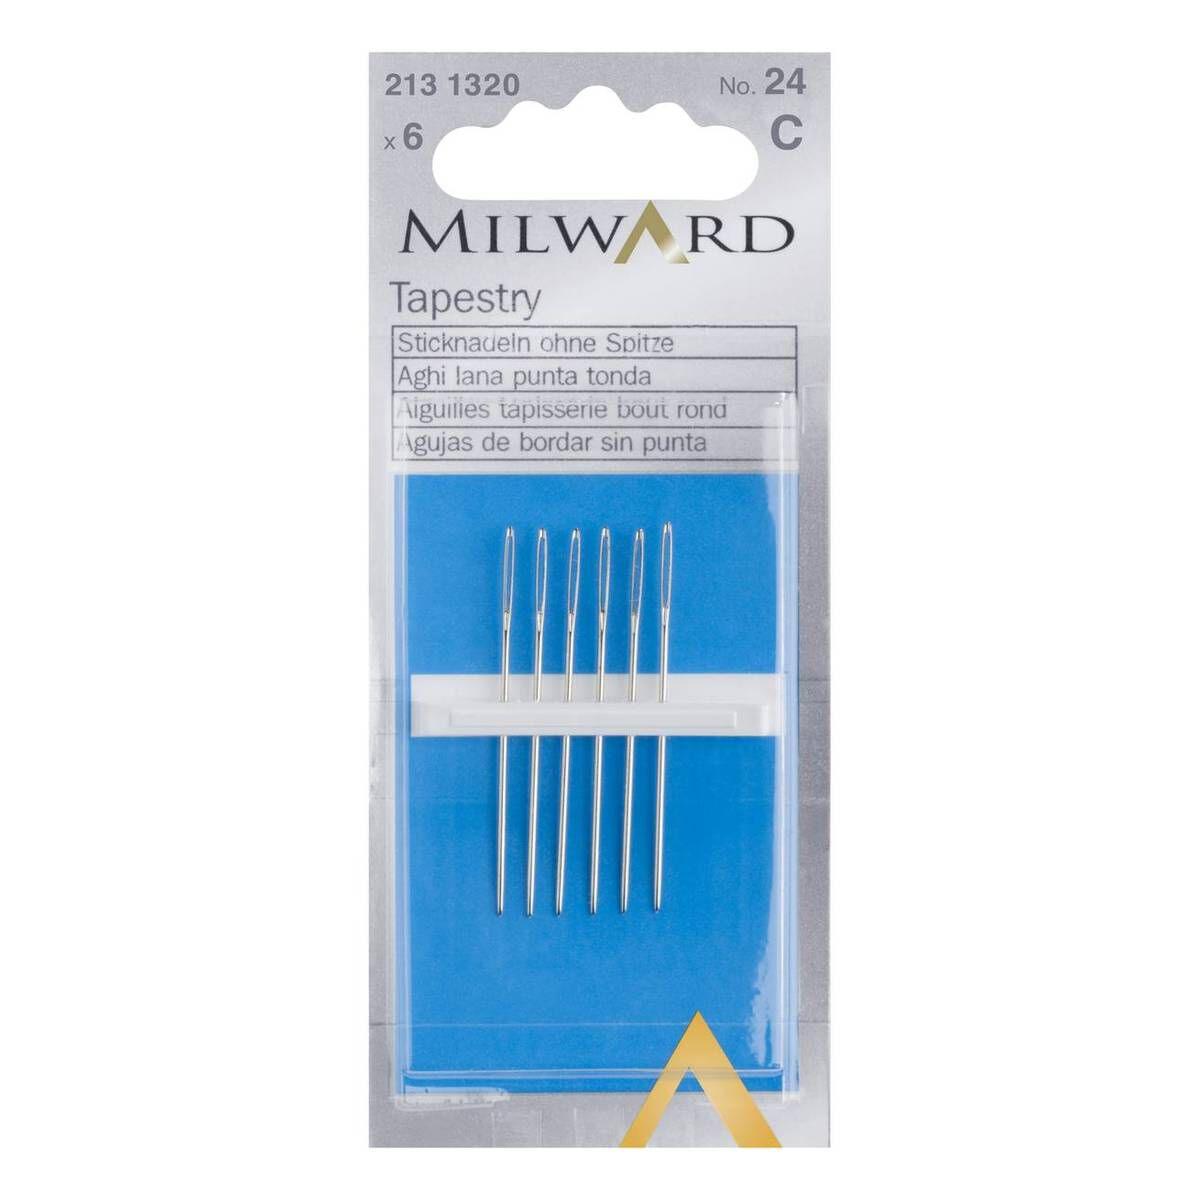 Milward Tapestry Needles No. 24 - 6 Pack - Luca-S New